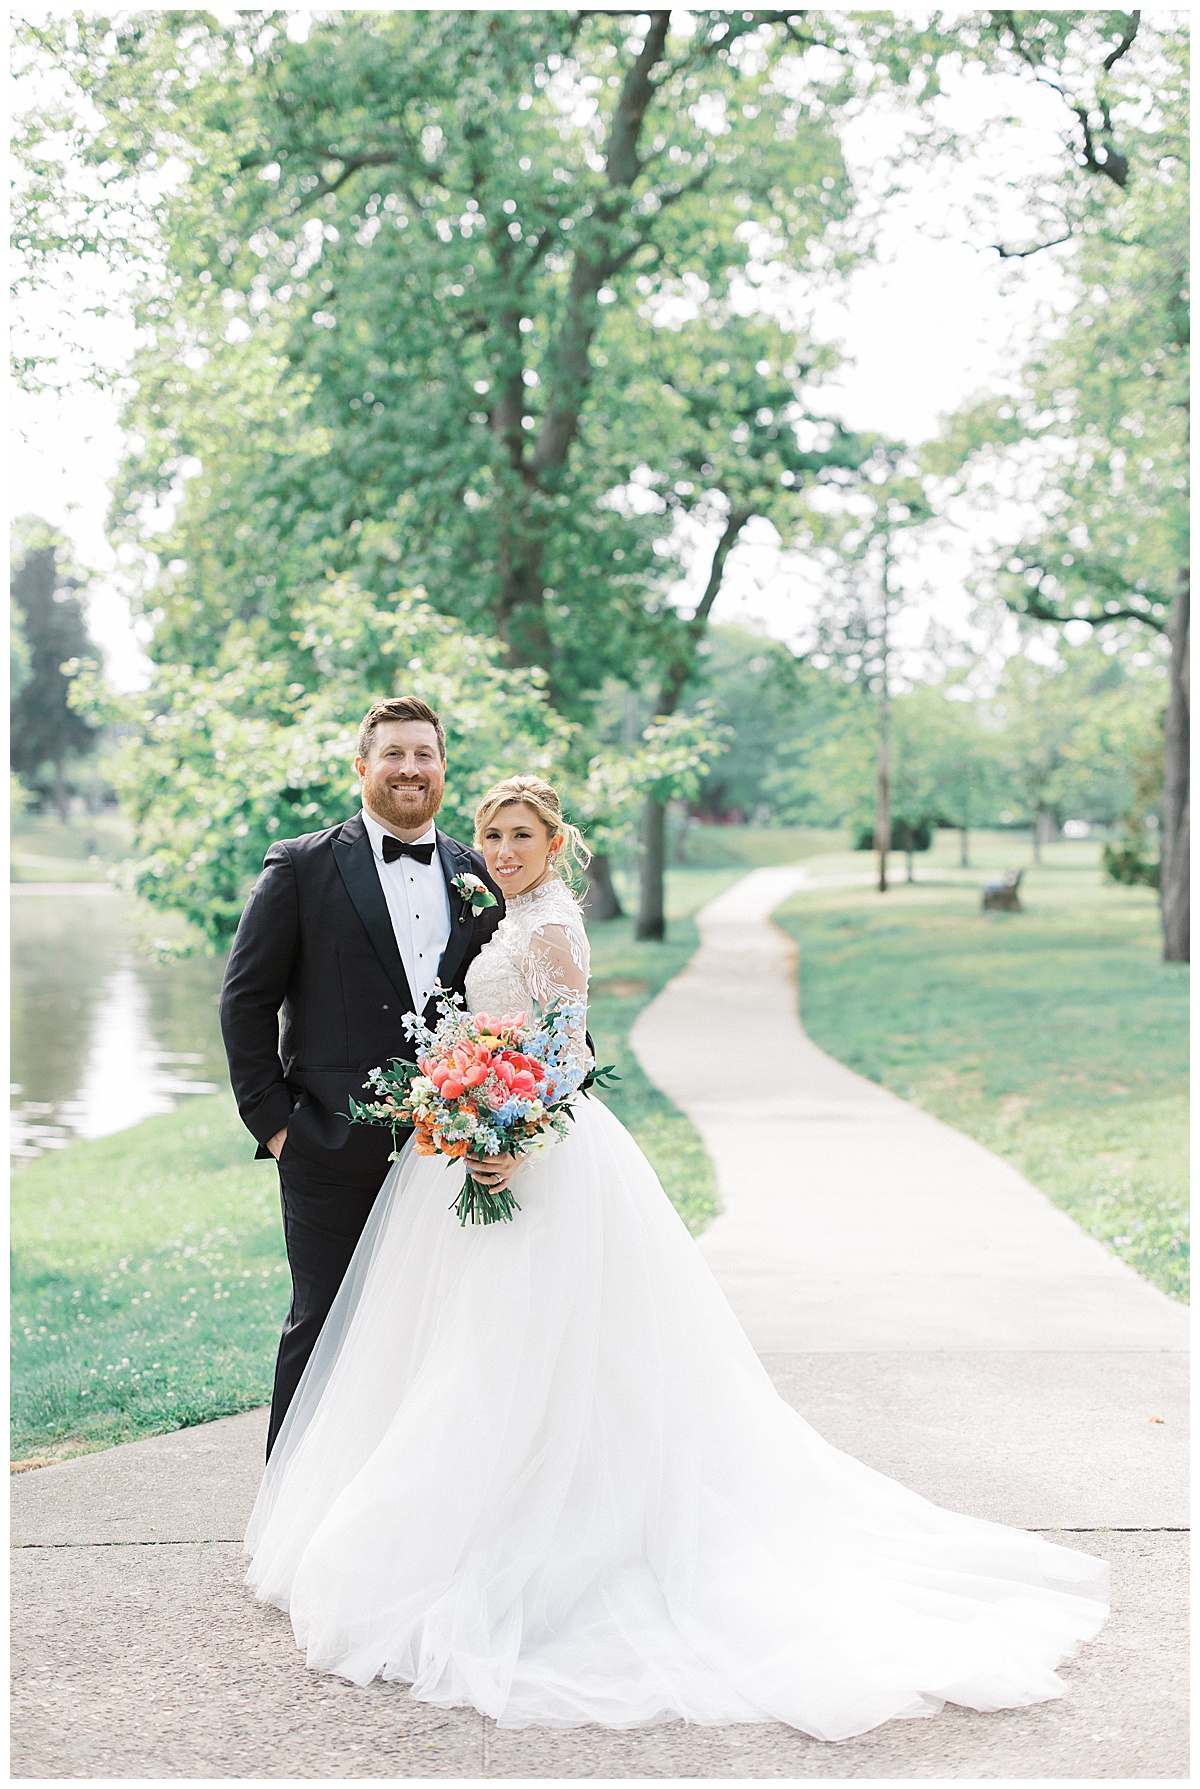 Bride and groom smile together with colorful wildflower bouquet in park with lake.